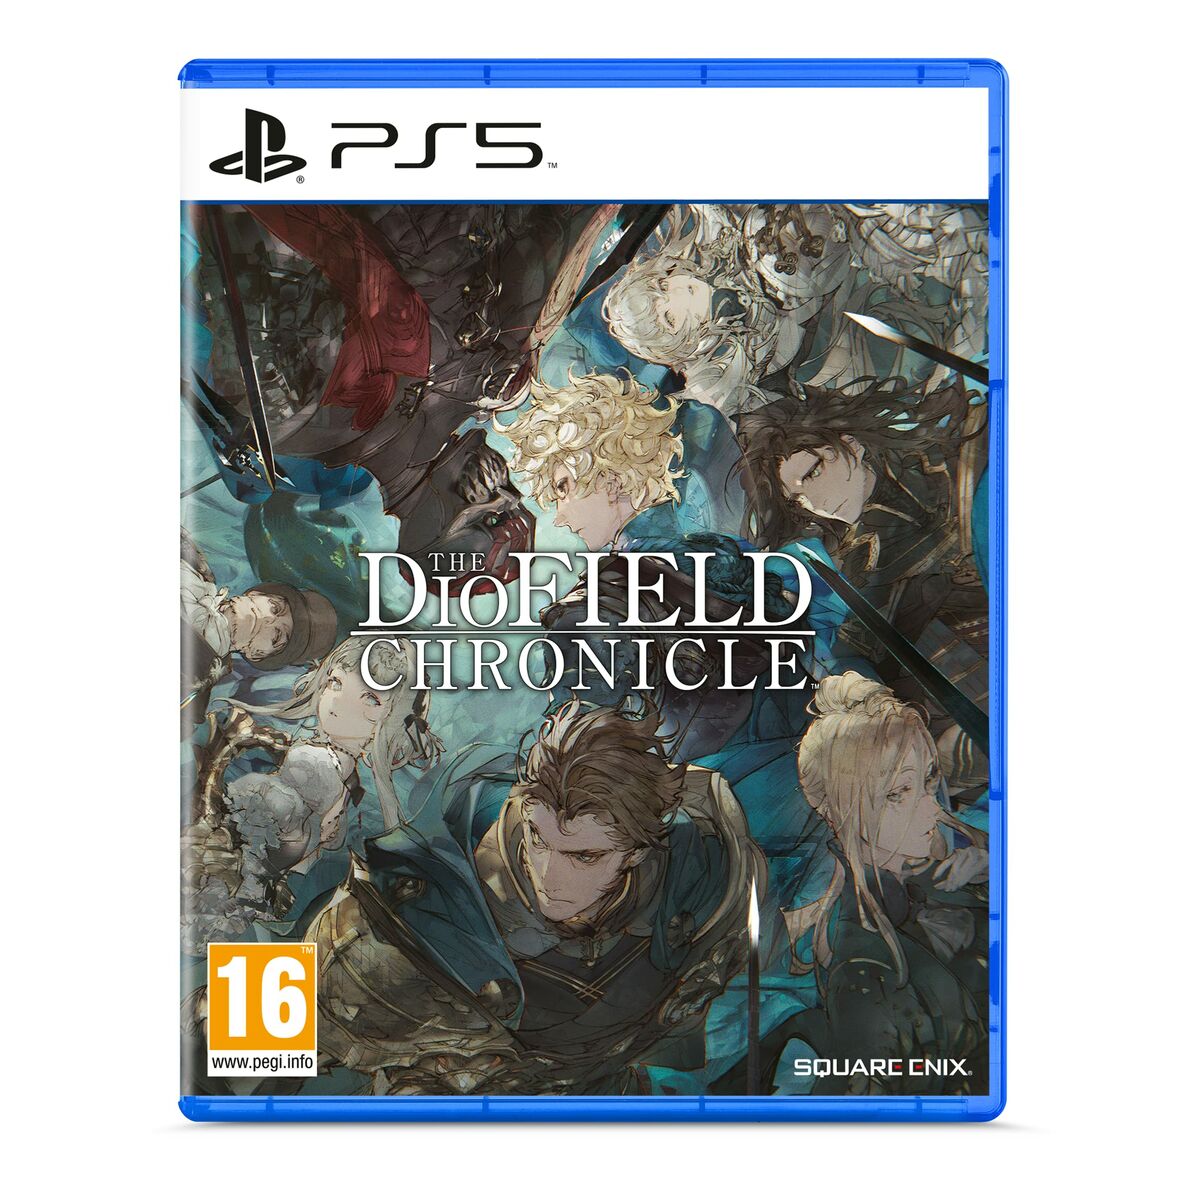 Joc video PlayStation 5 Square Enix The Diofield Chronicle